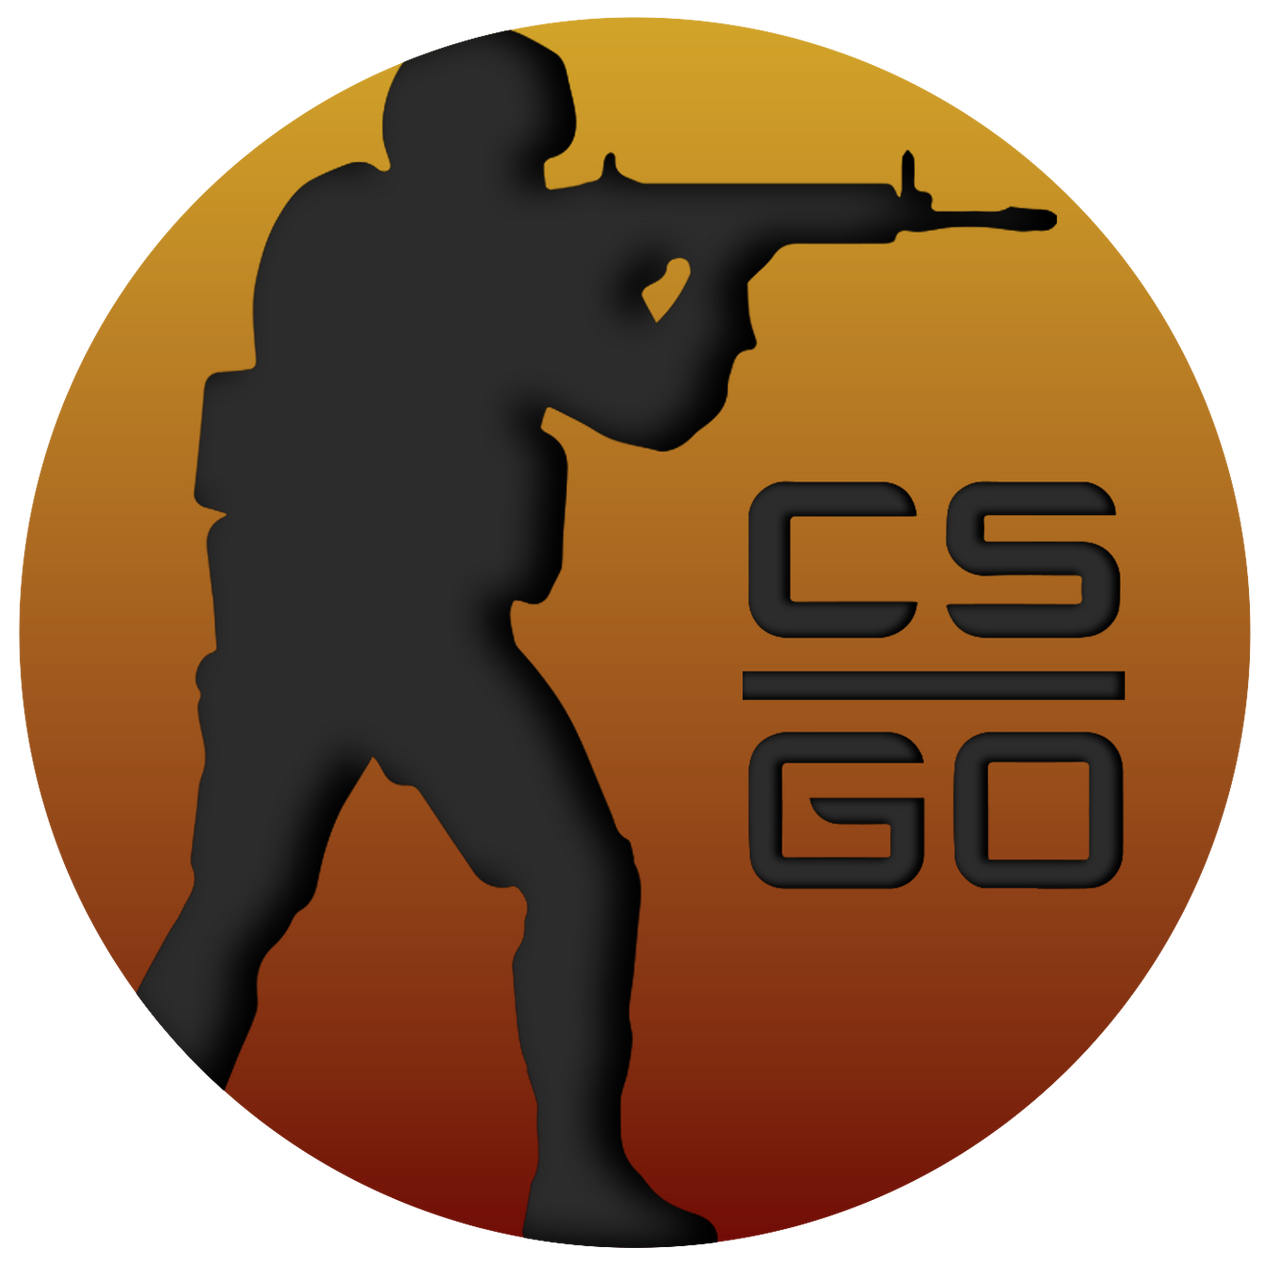 Counter-Strike Global Offensive значок. Значок CS go PNG. Значок КСГО 1.6. Круглый значок КС го. Кс го d